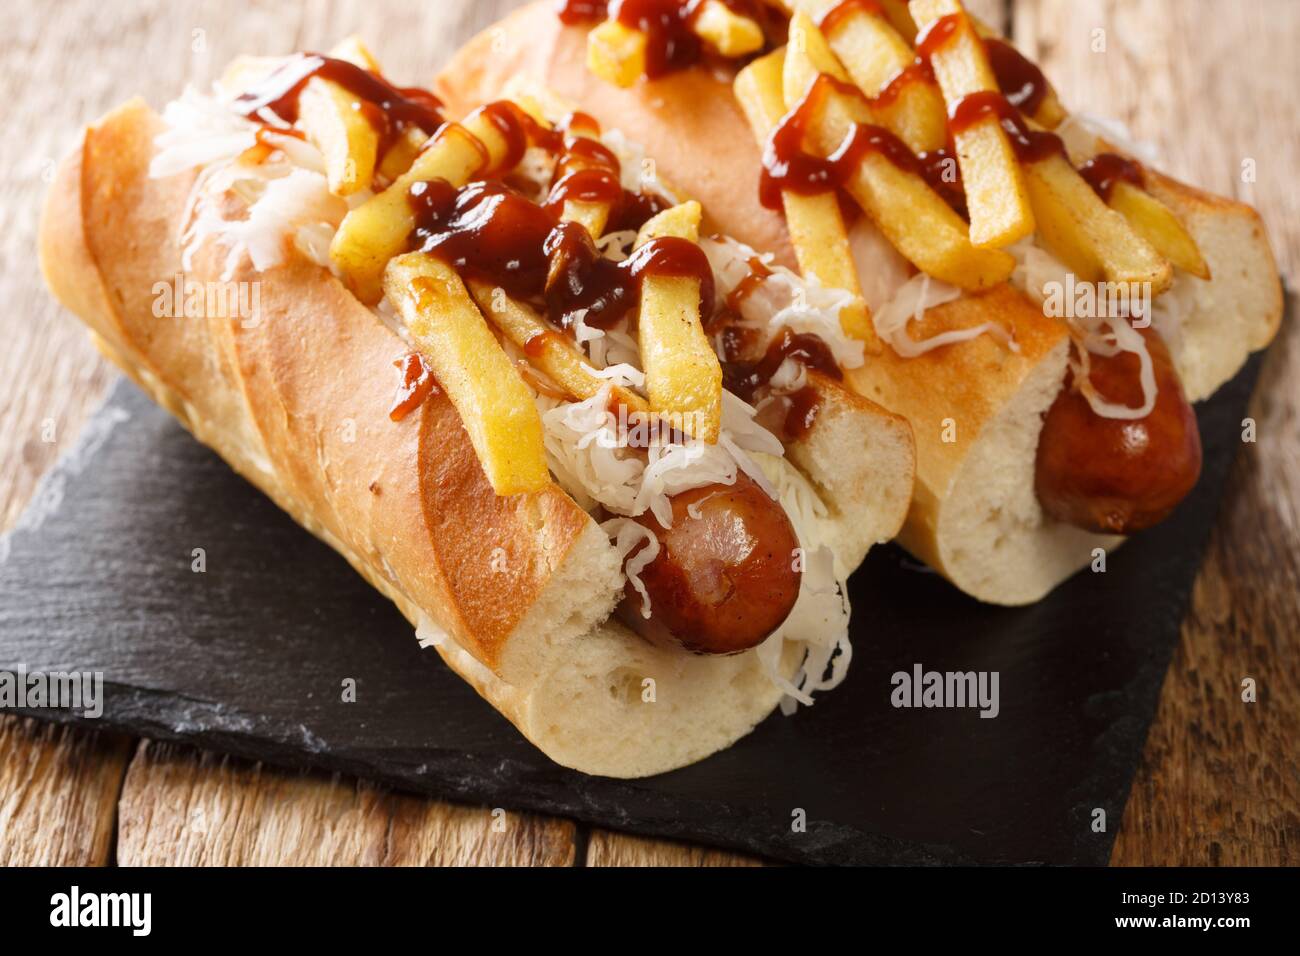 Delicious hot dog polish boy with sausage, cabbage, fries and barbecue sauce close-up on the table. horizontal Stock Photo